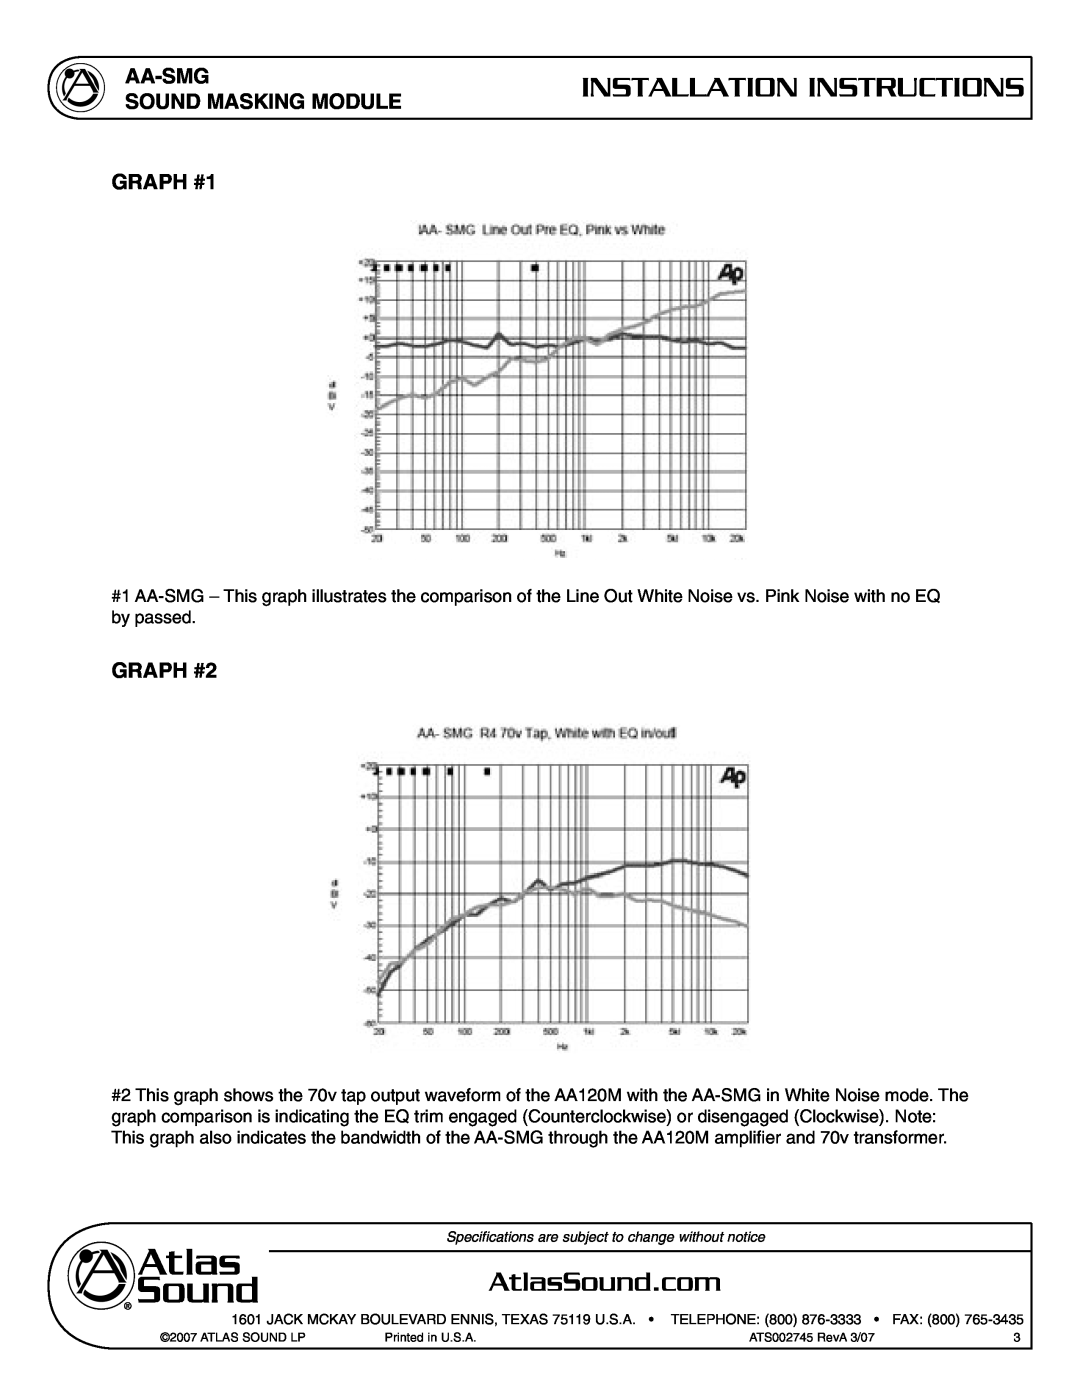 Atlas Sound specifications AA-SMG SOUND MASKING MODULE GRAPH #1, GRAPH #2, Installation Instructions, Atlas Sound Lp 